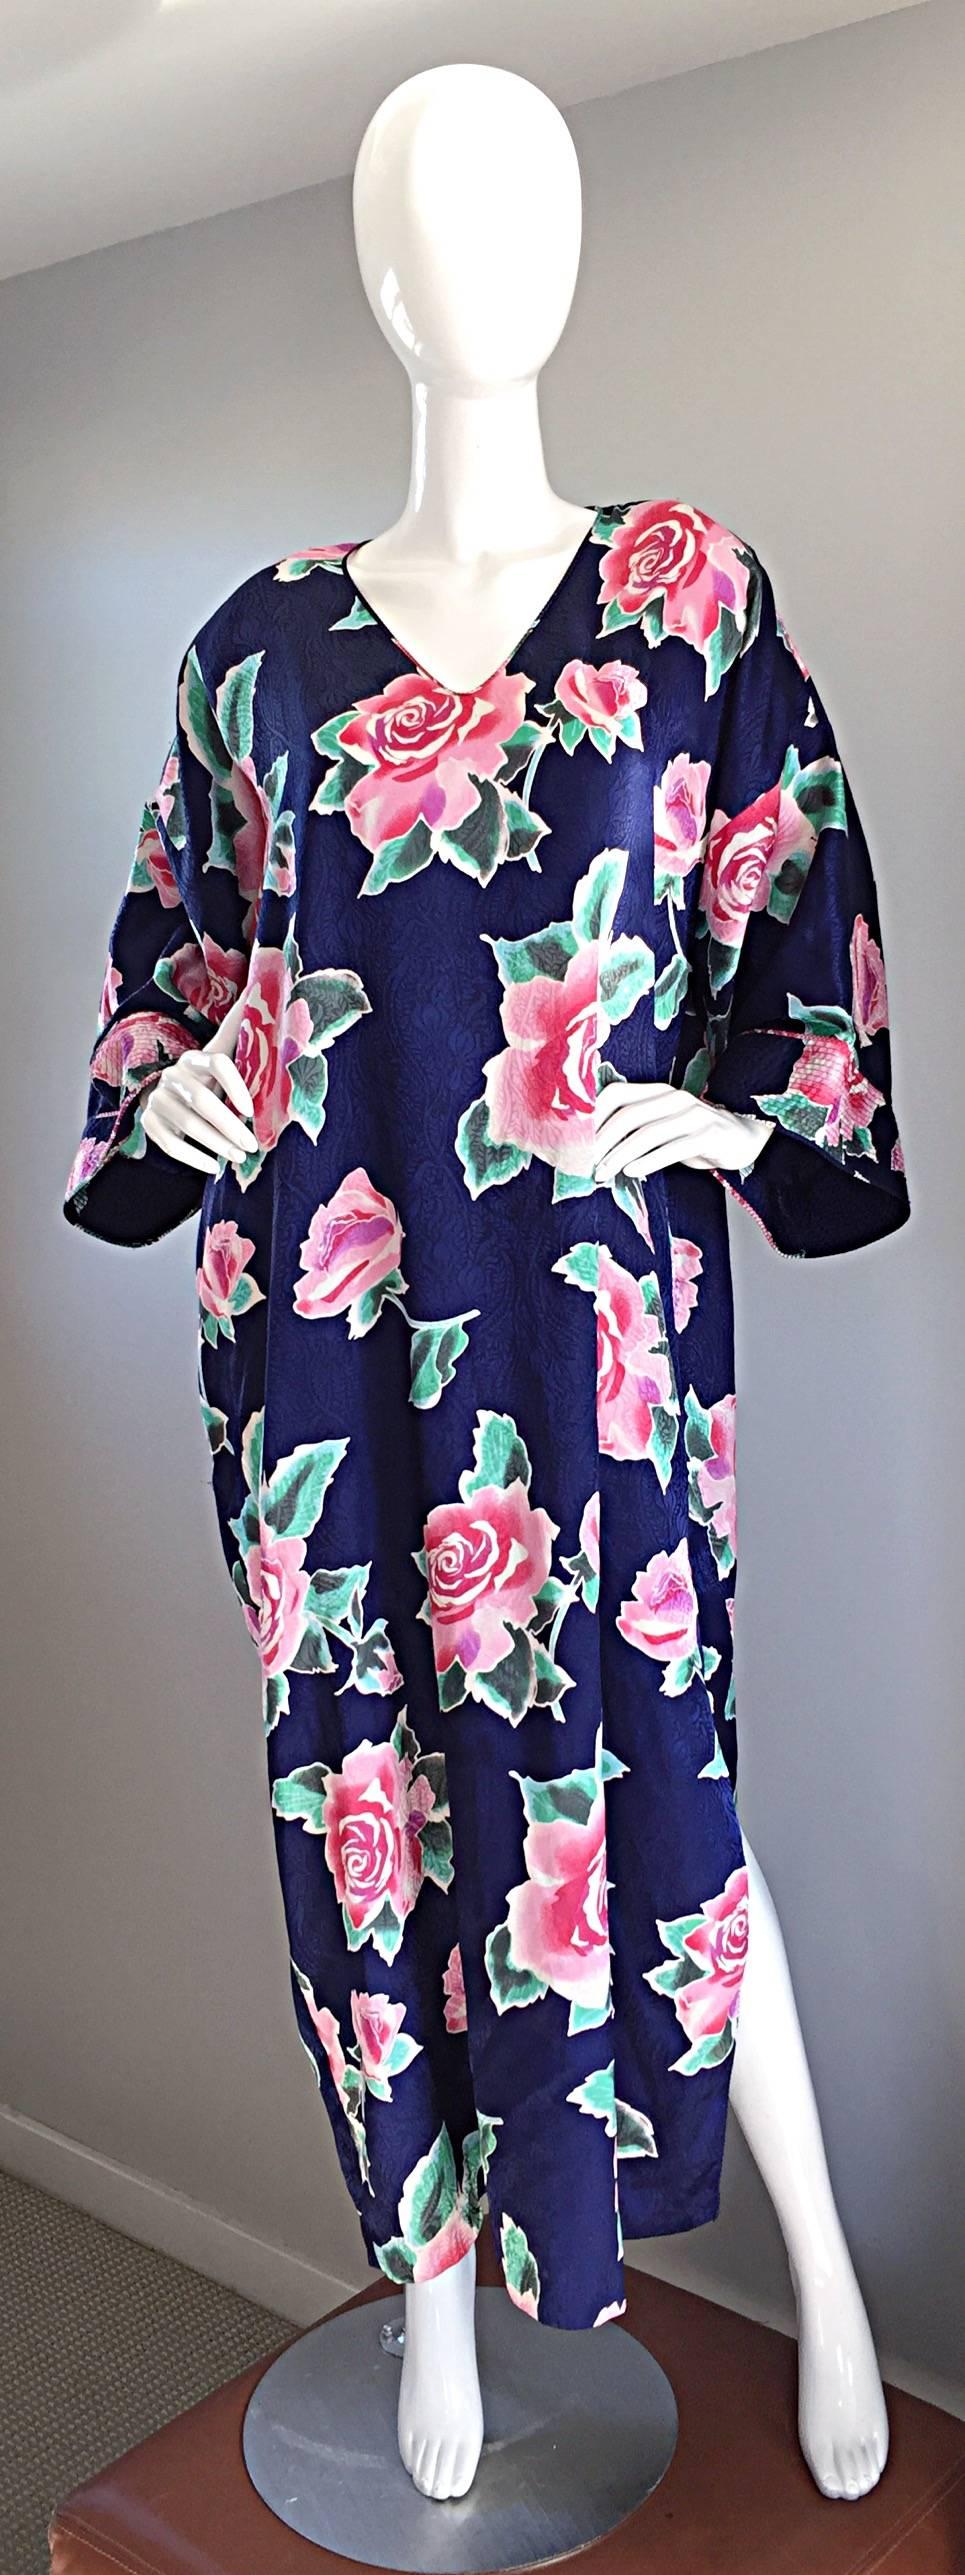 Vintage Mary McFadden Purple + Pink + Green 3-D Rose Print Caftan Dress In Excellent Condition For Sale In San Diego, CA